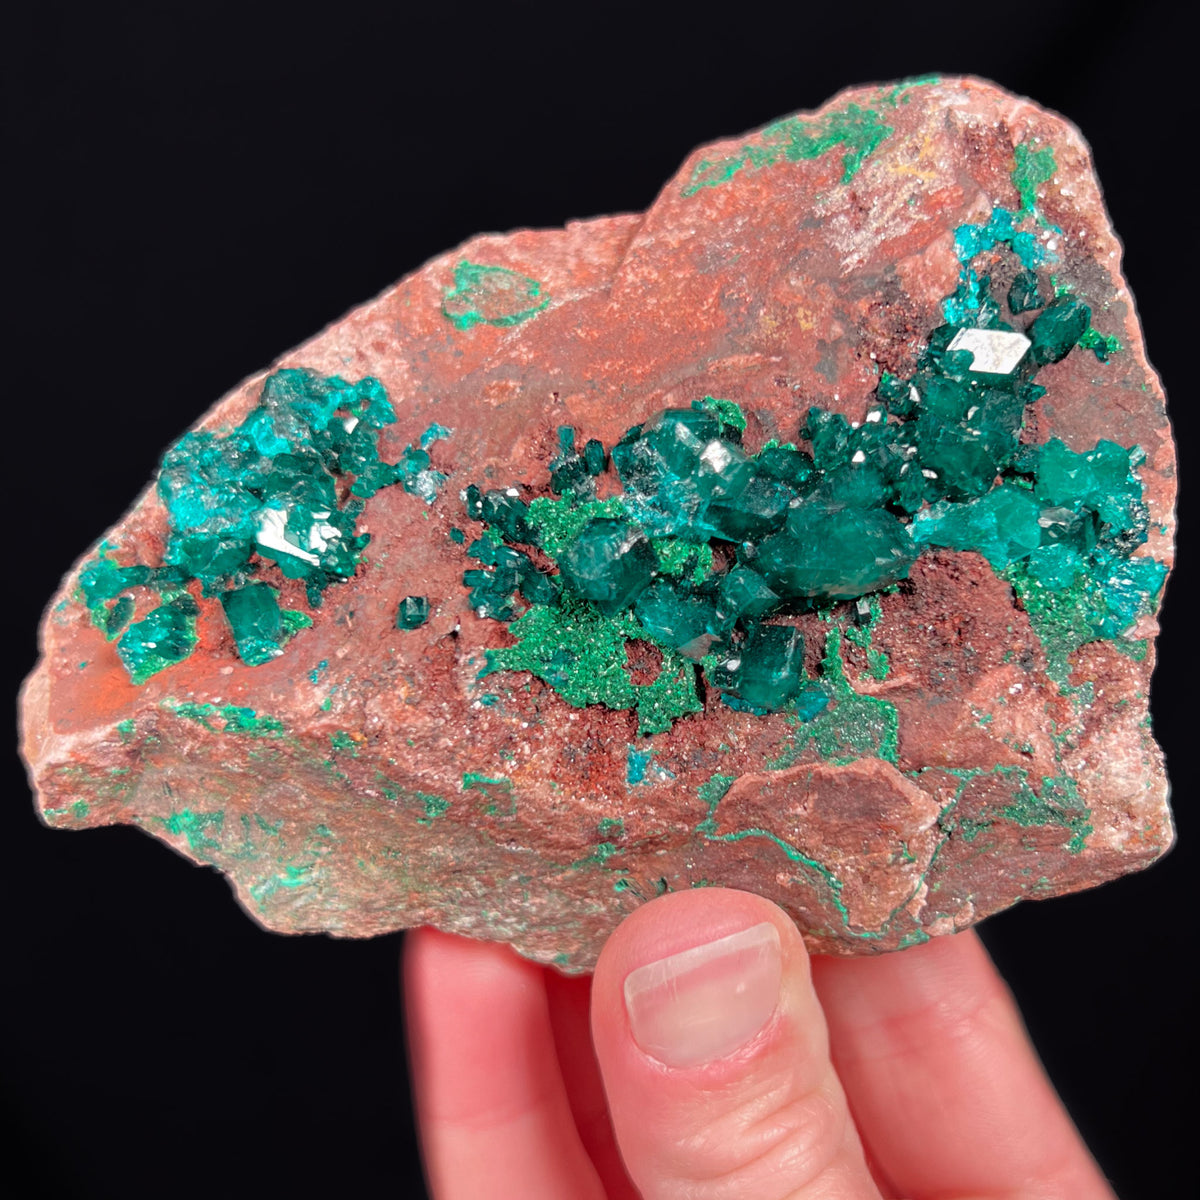 Large Mineral Specimen of Dioptase with Malachite from the Congo